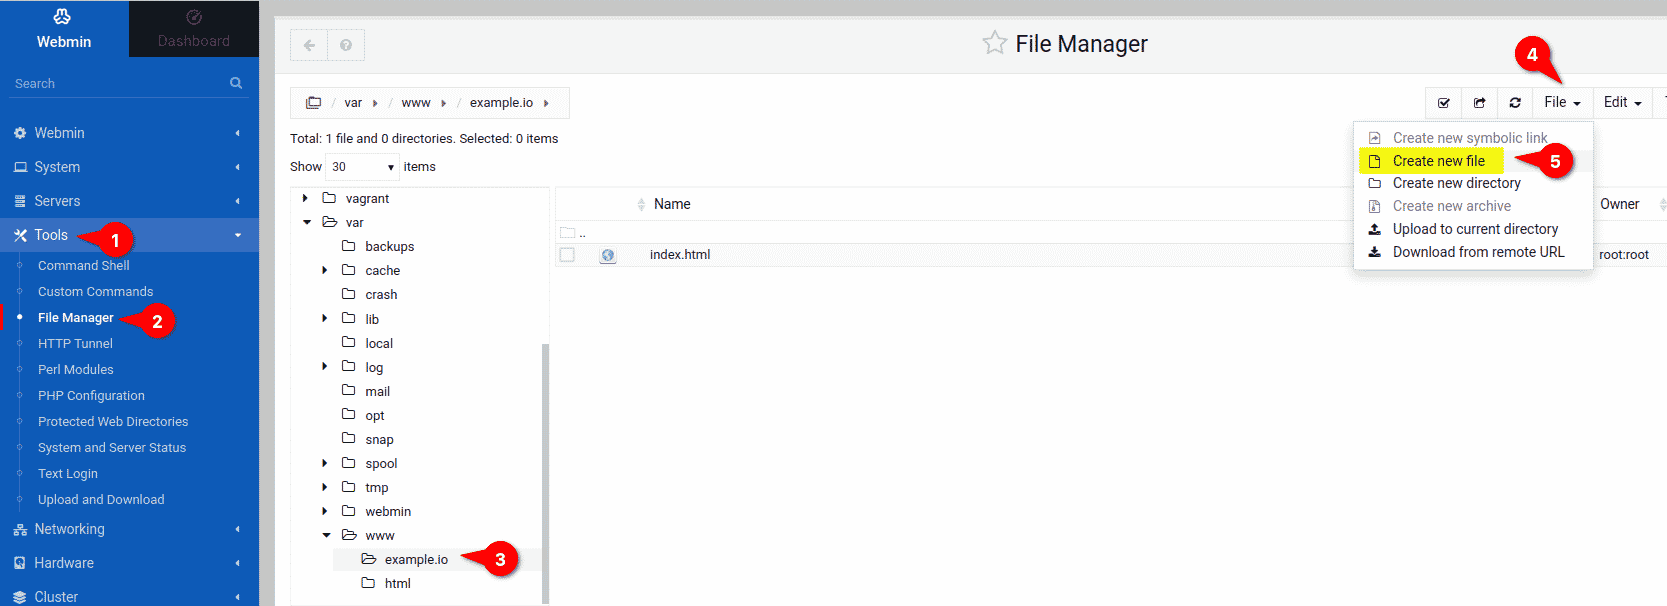 Creating a New File